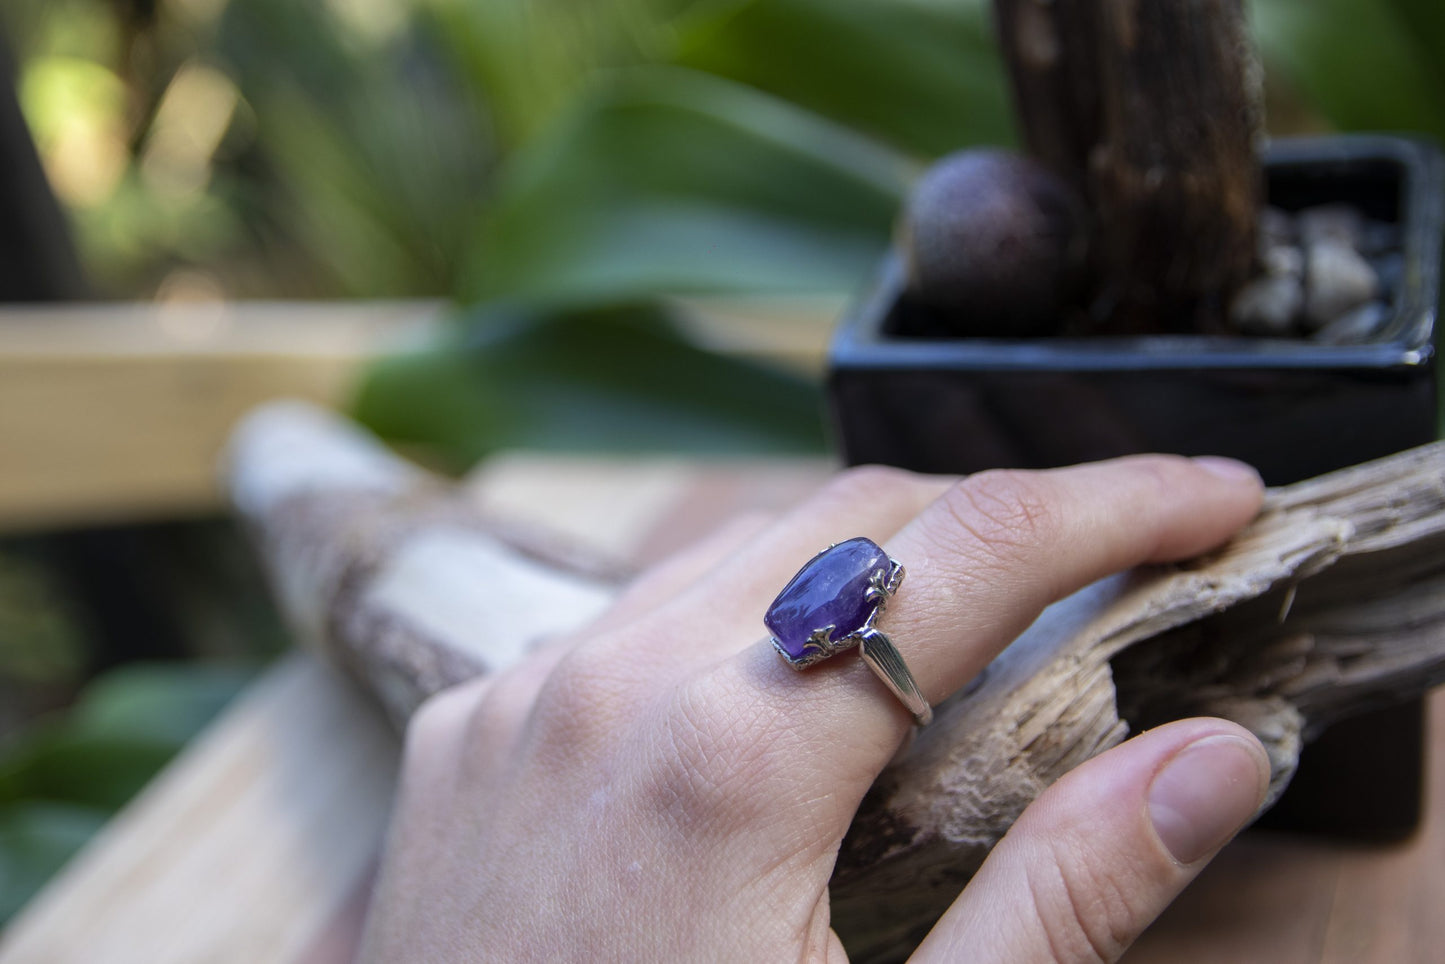 Hand cut Brazilian amethyst, unique elongated hexagon shape, set in silver plated art-deco styled adjustable ring, side view